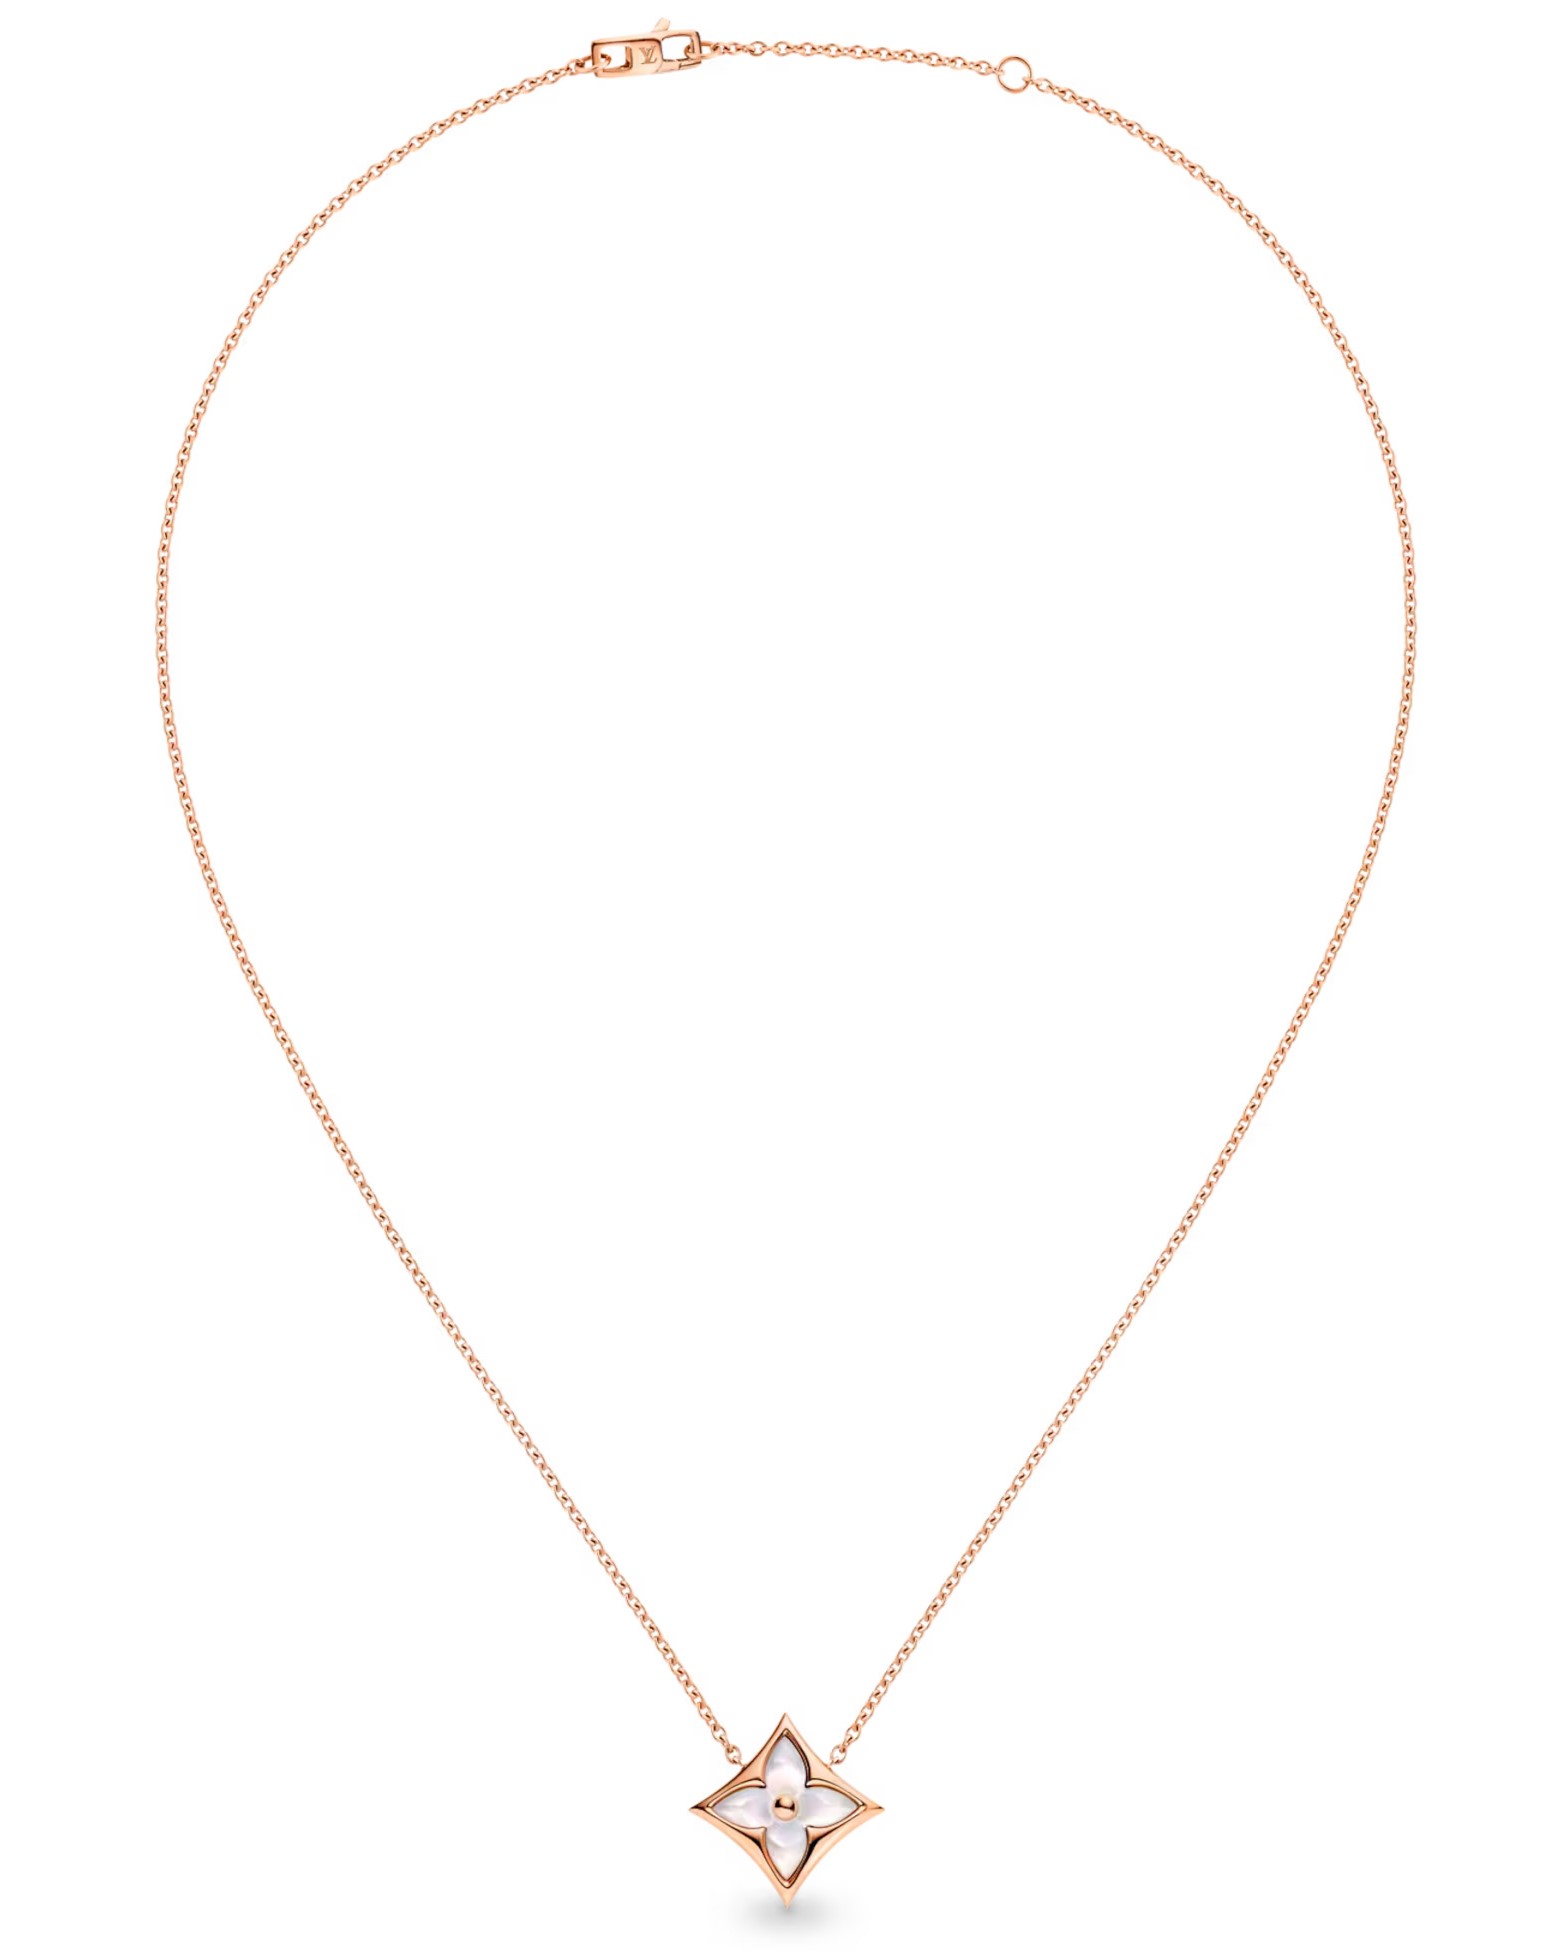 DÂY CHUYỀN LV LOUIS VUITTON COLOR BLOSSOM STAR PENDANT PINK GOLD AND WHITE MOTHER-OF-PEARL Q93521 3